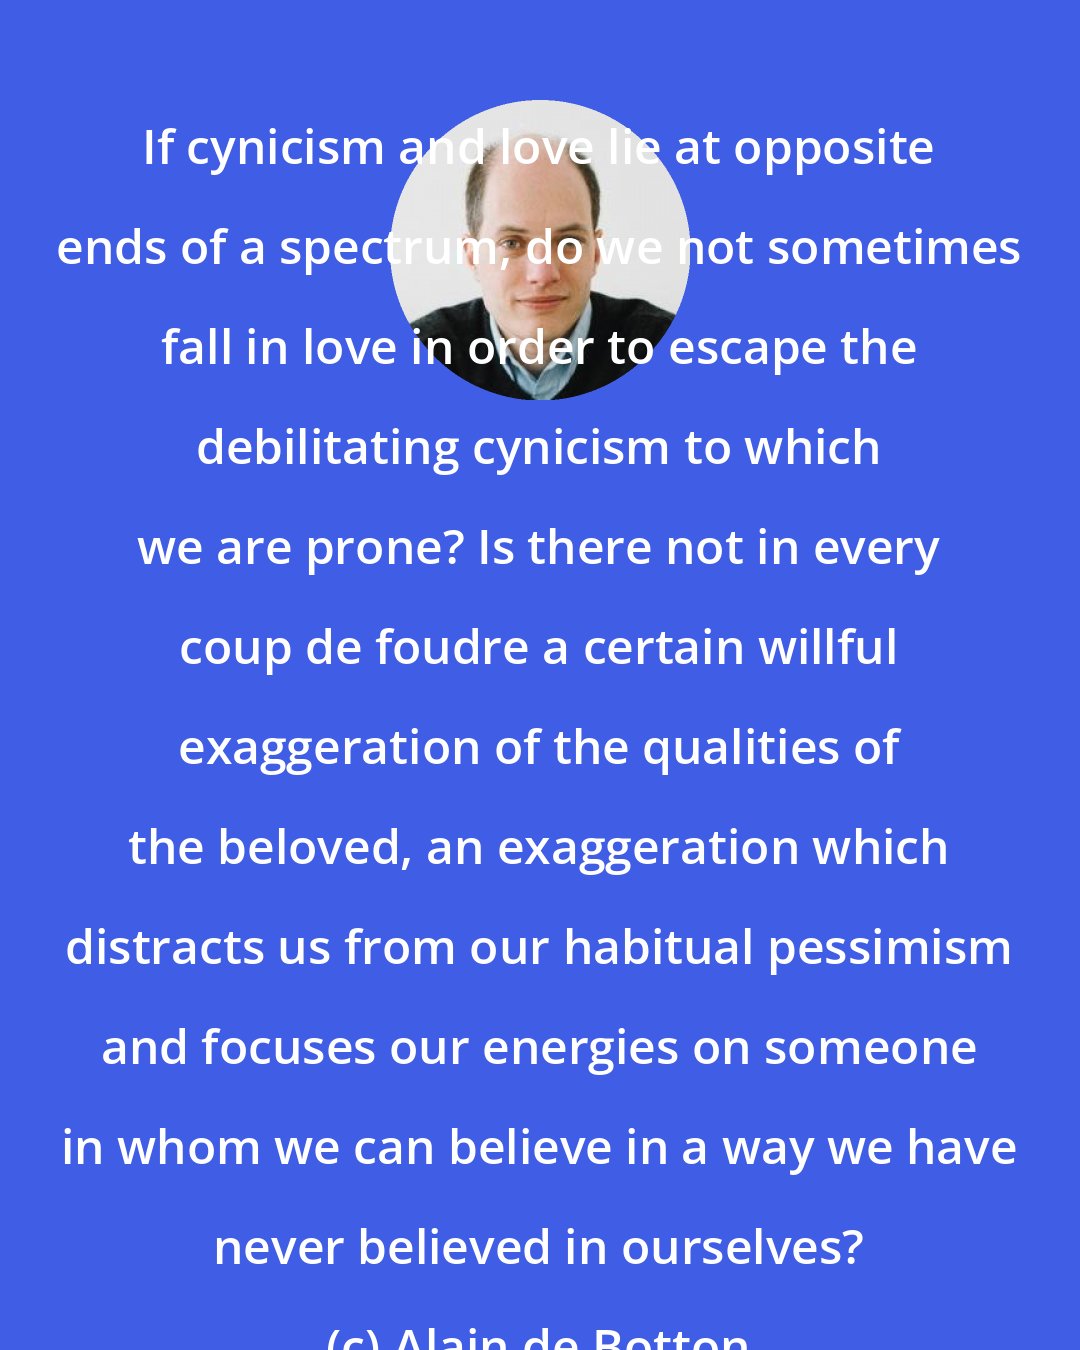 Alain de Botton: If cynicism and love lie at opposite ends of a spectrum, do we not sometimes fall in love in order to escape the debilitating cynicism to which we are prone? Is there not in every coup de foudre a certain willful exaggeration of the qualities of the beloved, an exaggeration which distracts us from our habitual pessimism and focuses our energies on someone in whom we can believe in a way we have never believed in ourselves?